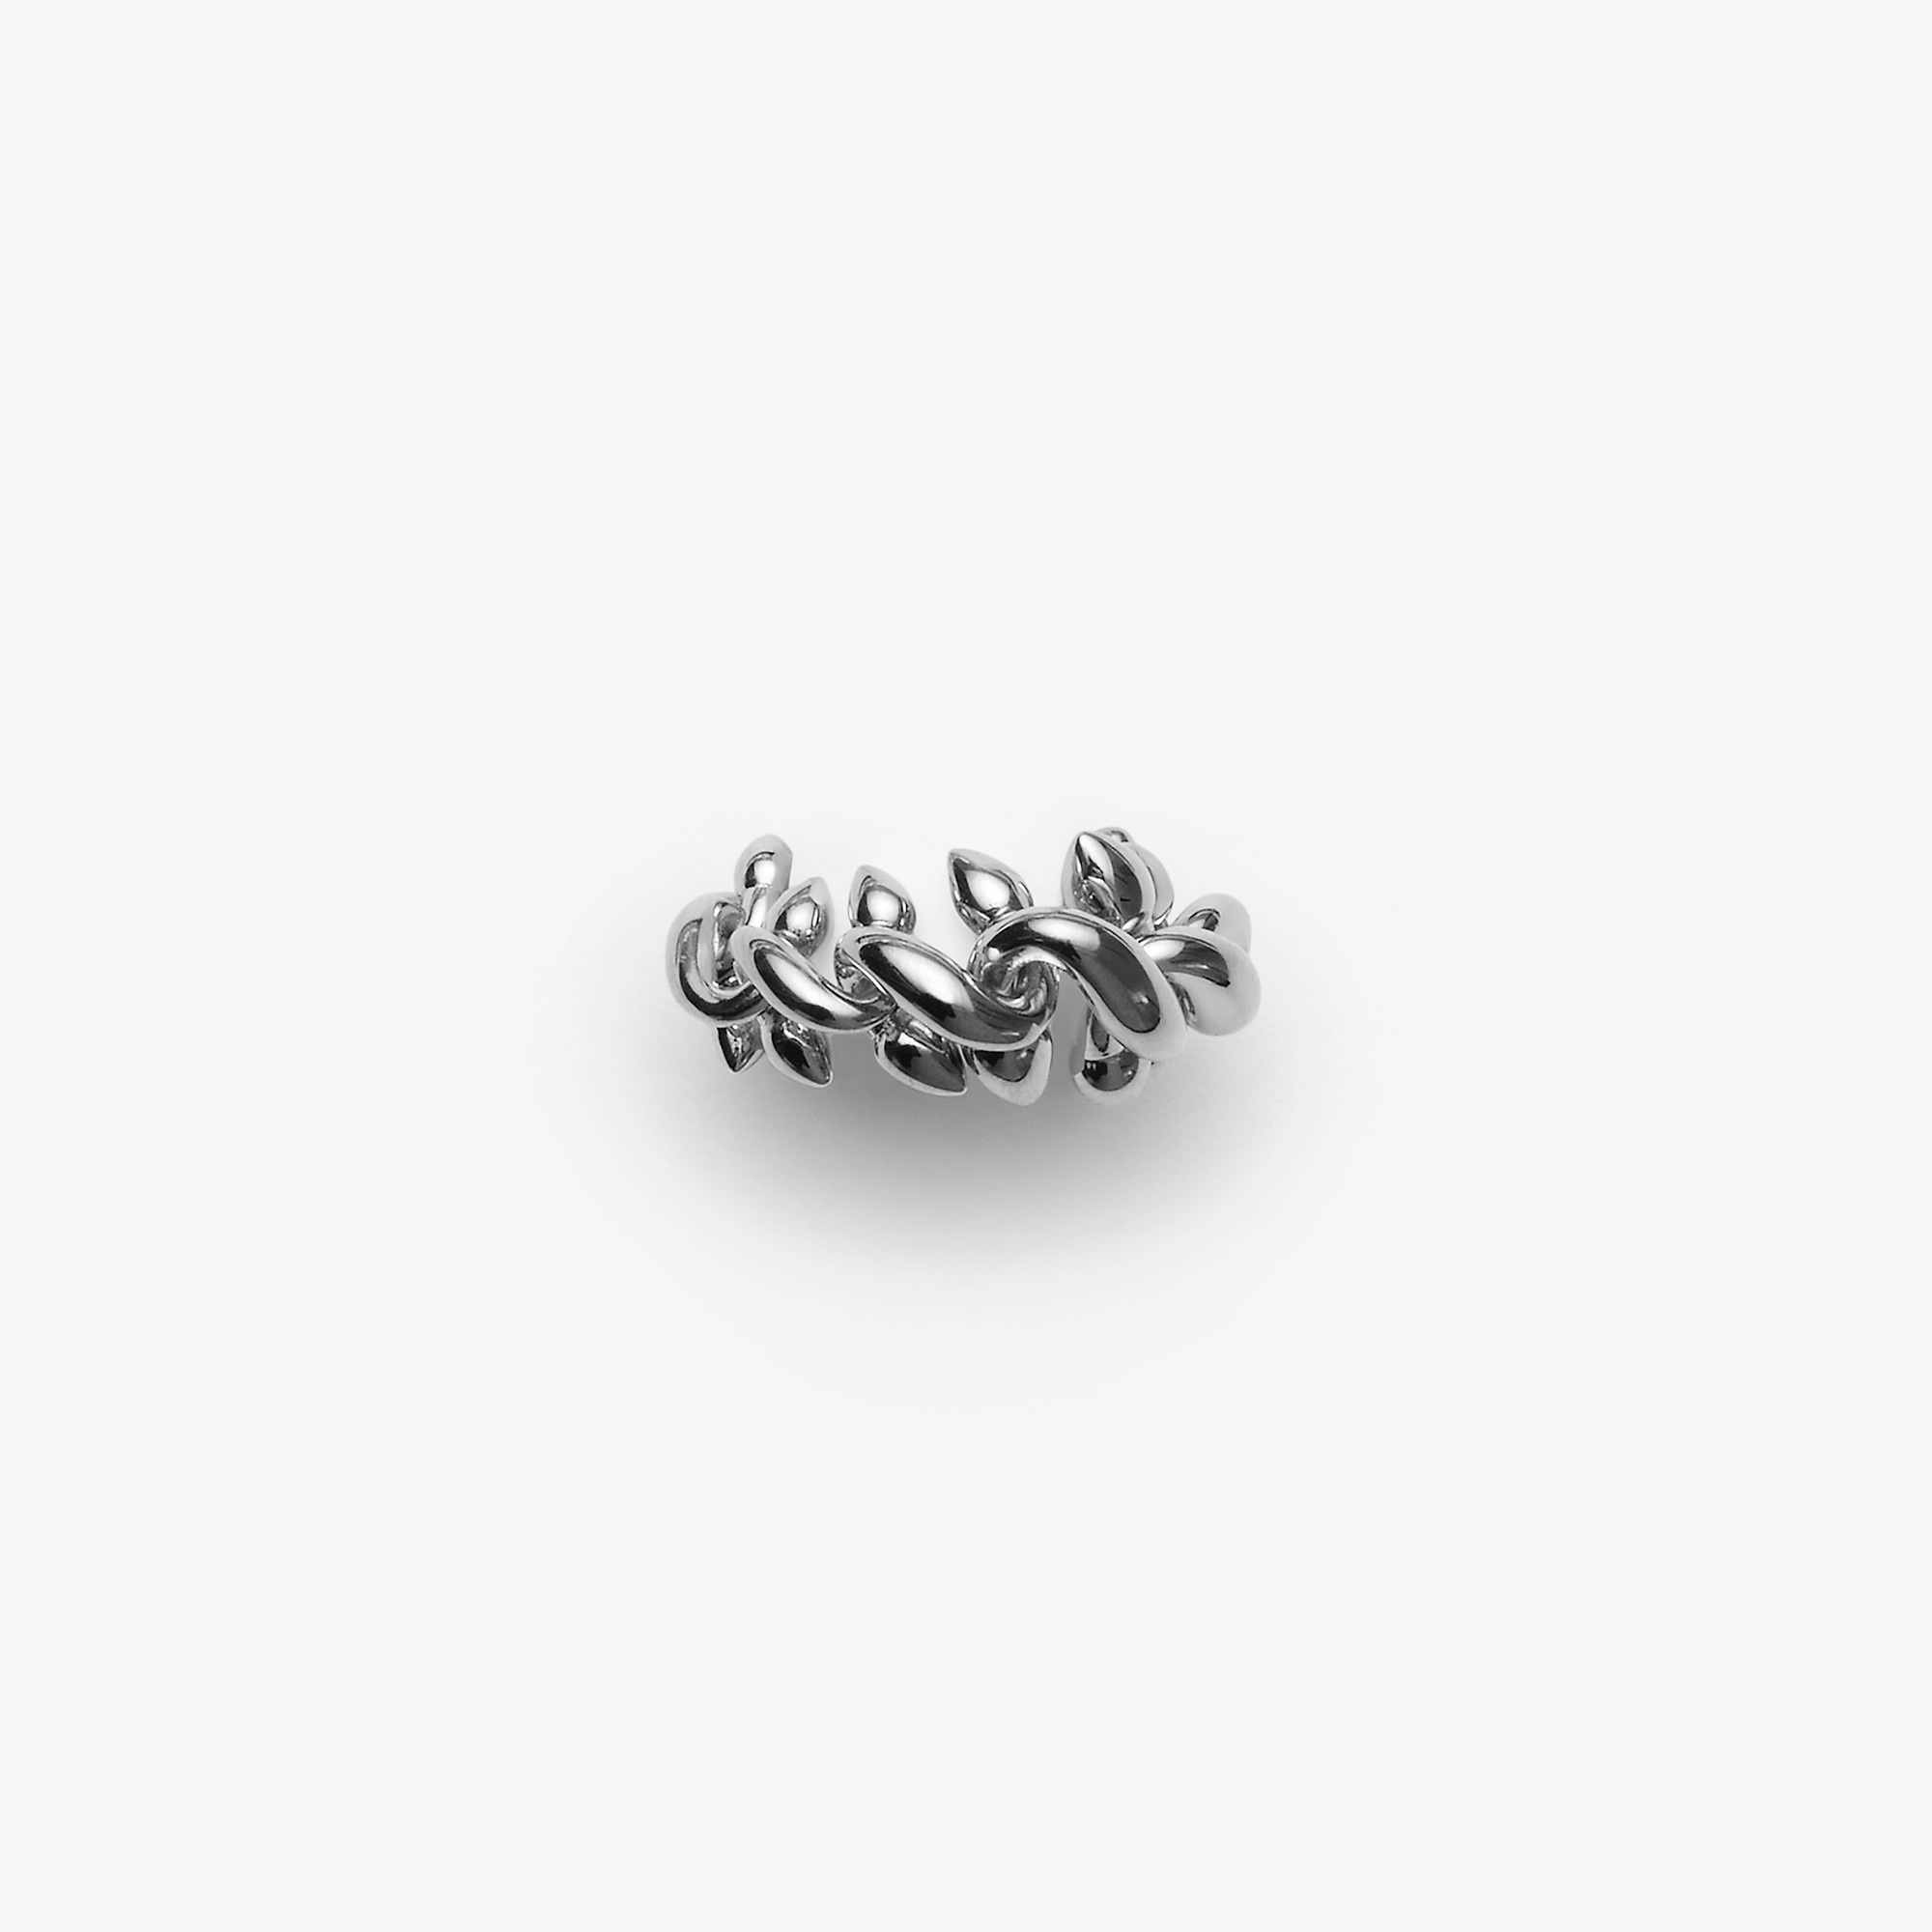 Spear Chain Ring - 1